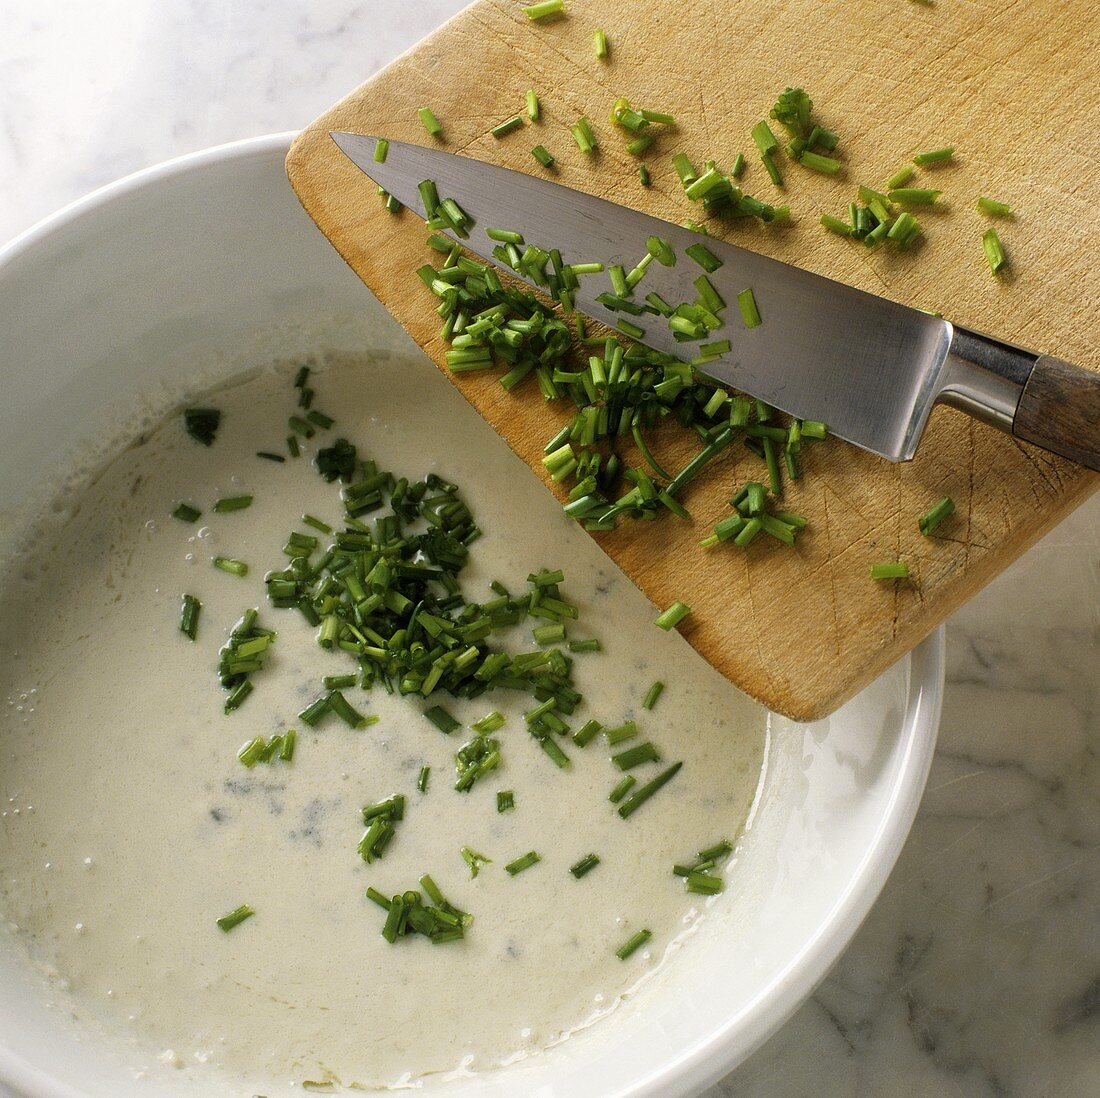 Making cheese sauce with chives